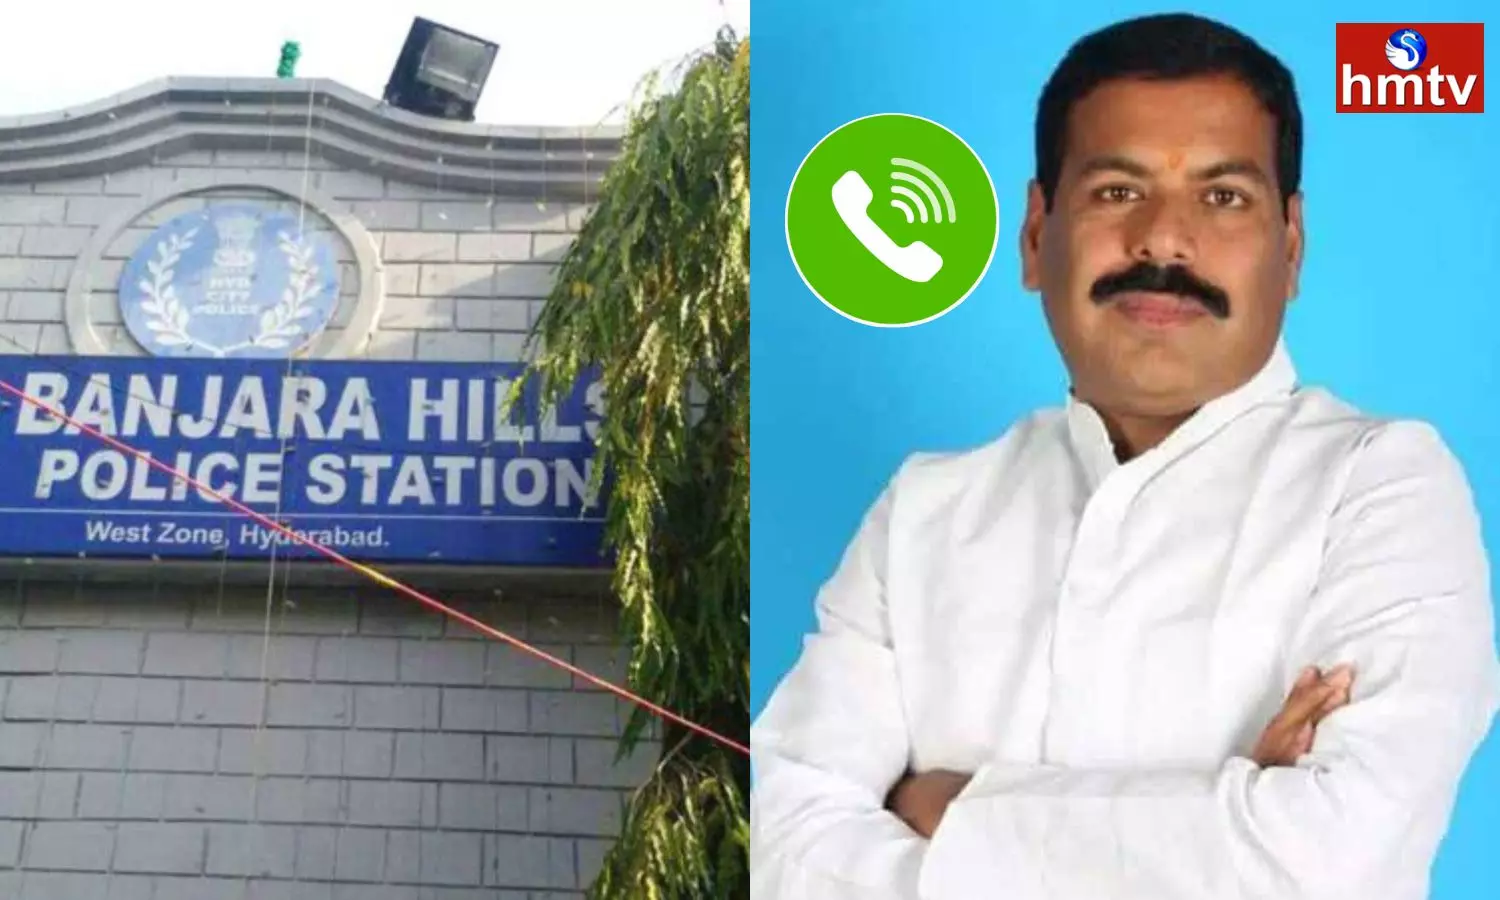 Threatening calls to MLAs in the farmhouse case